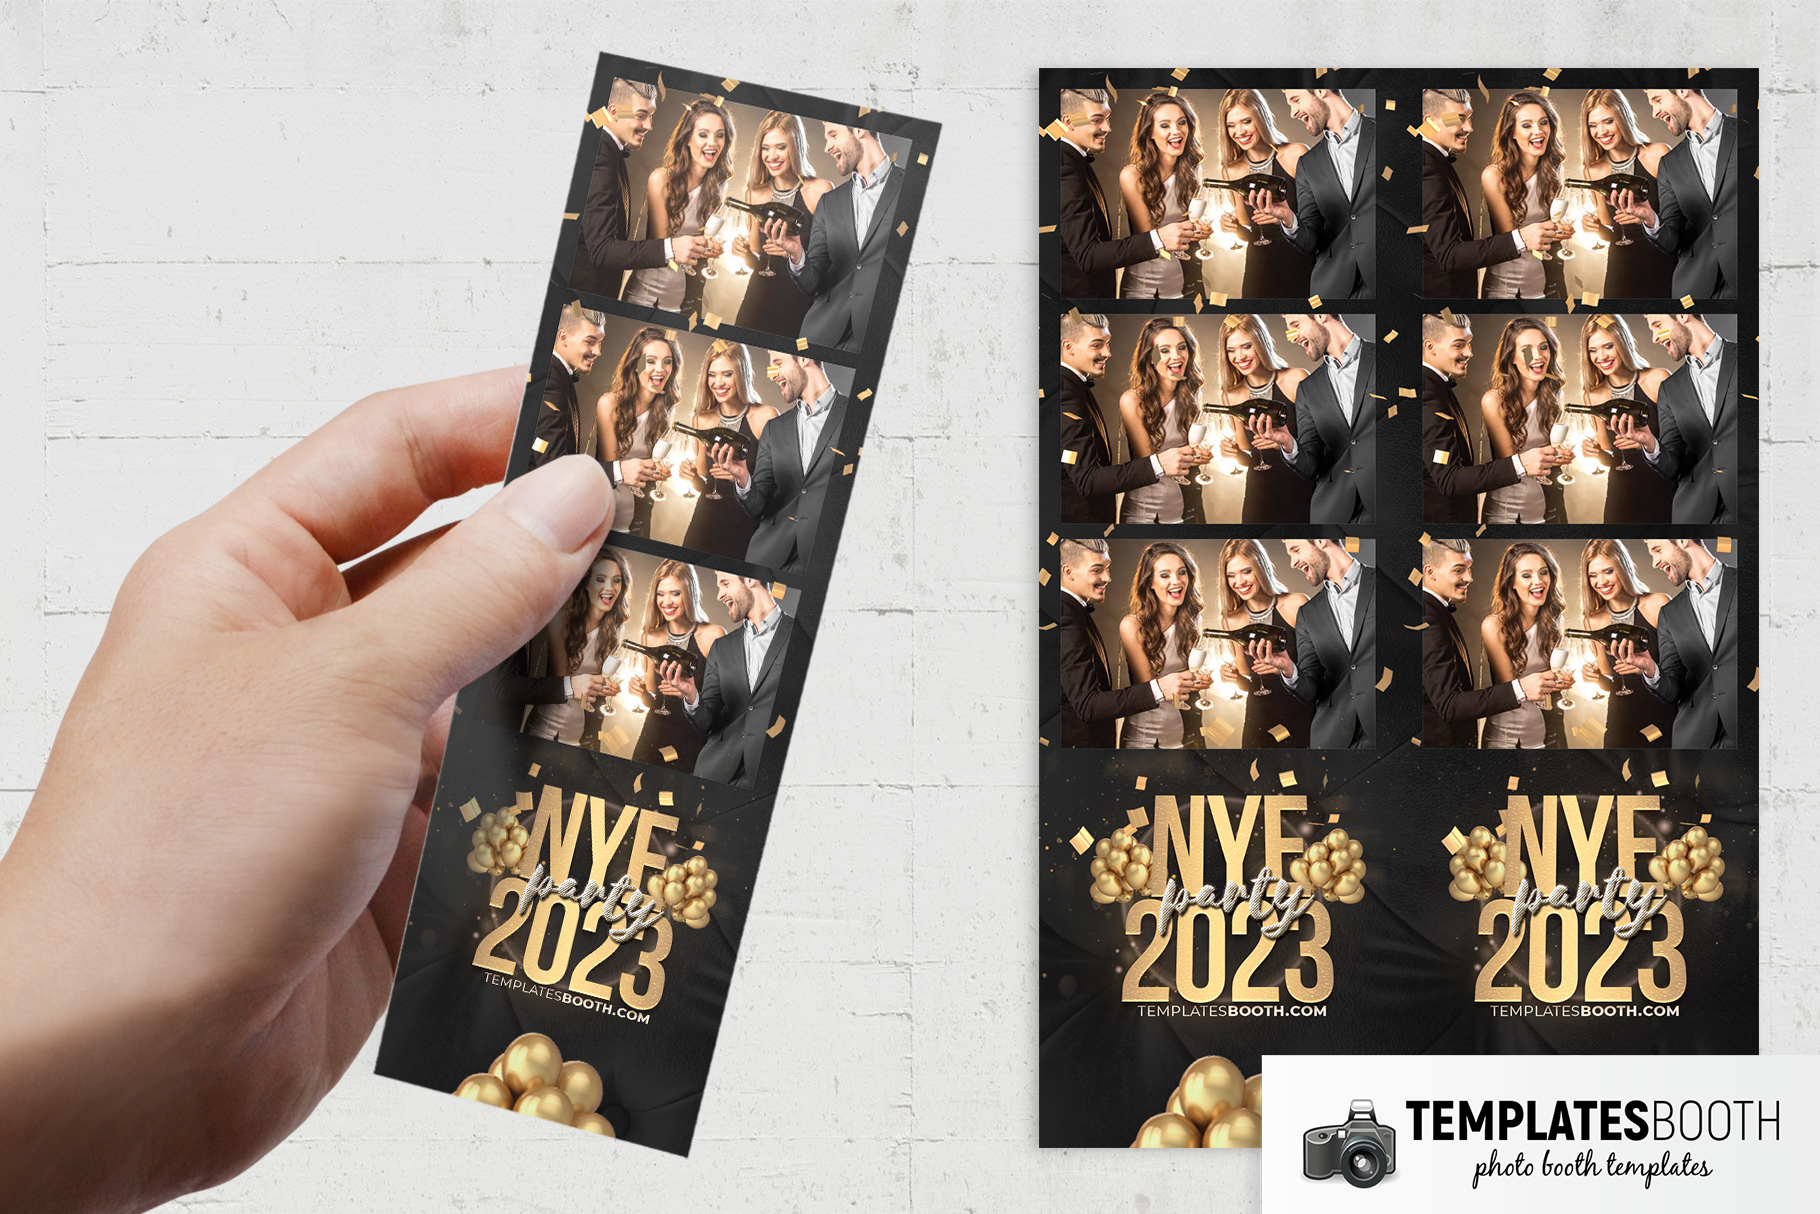 New Year's Eve Photo Booth Template